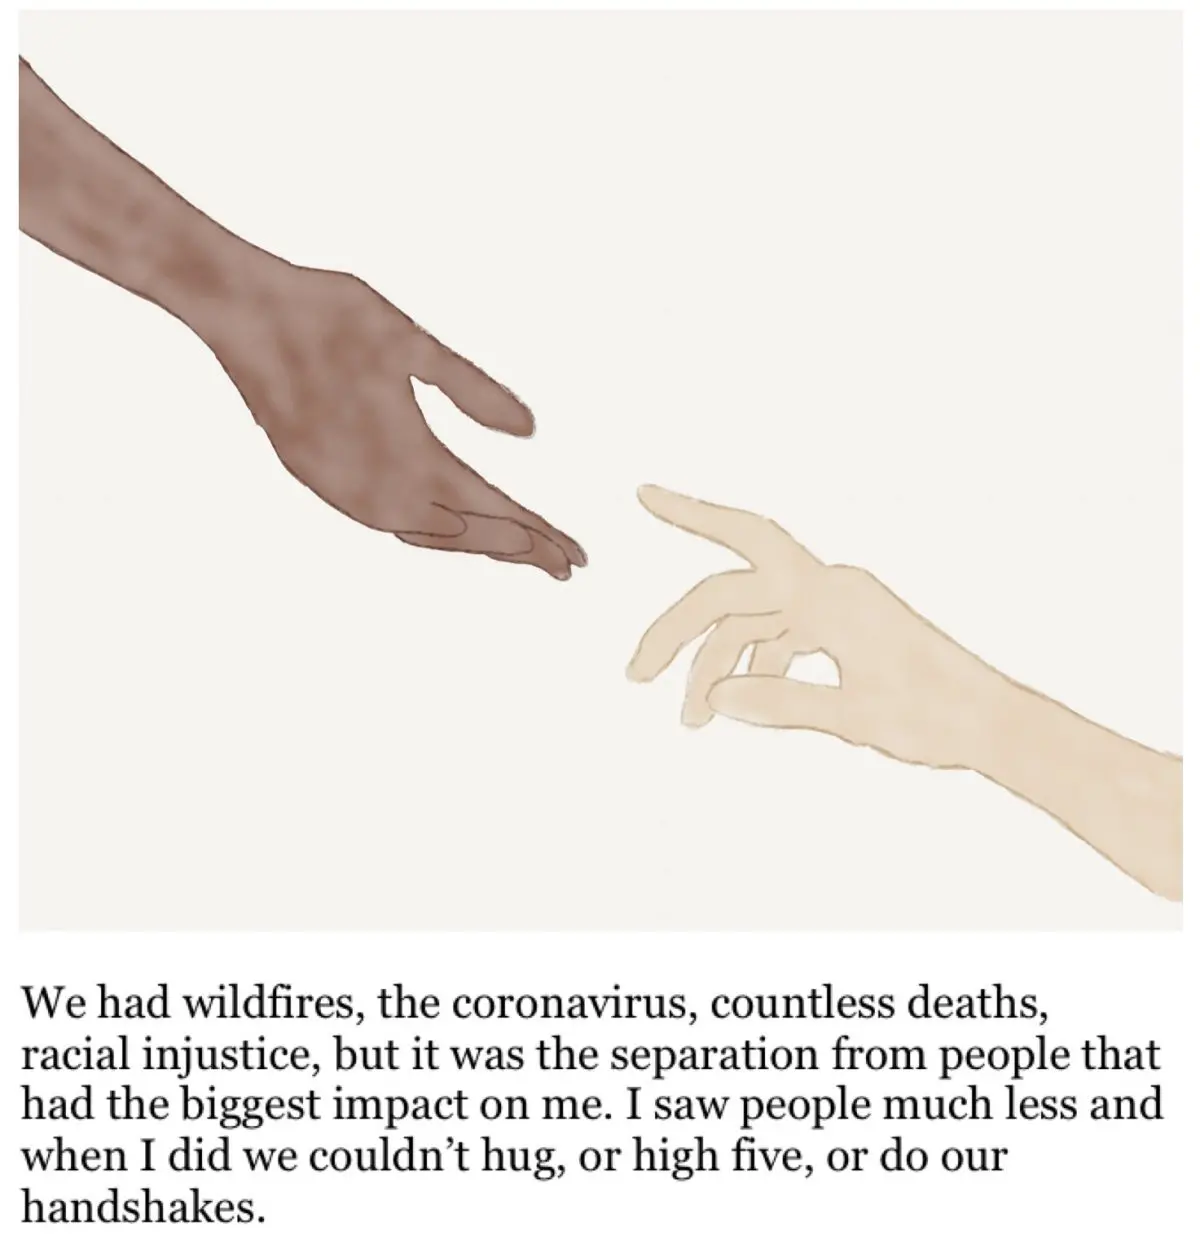 Drawing of two hands reaching for each other and the text below says "We had wildfires, the coronavirus, countless deaths, racial injustice, but it was the separation from people that had the biggest impact on me. I saw people much less and when I did we couldn't huge, or high five, or do our handshakes."